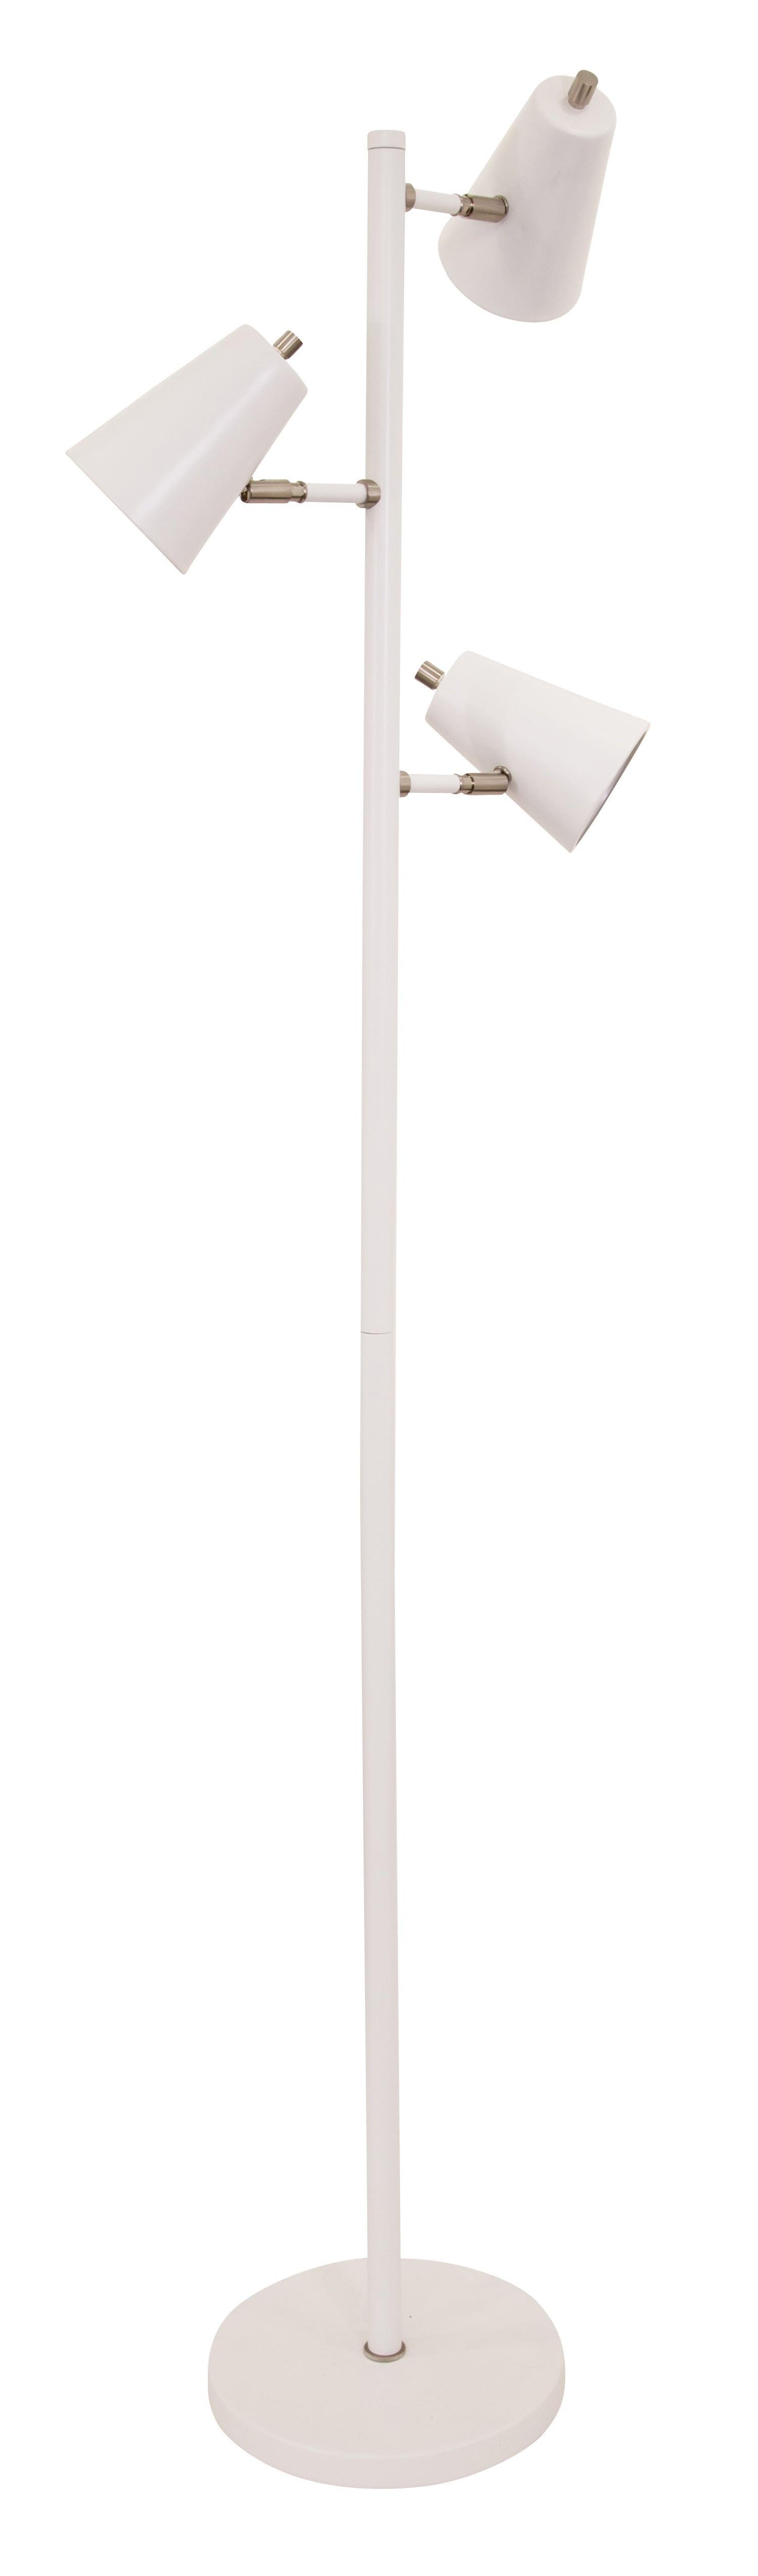 House of Troy Kirby LED three light floor lamp in white with satin nickel accents K130-WT